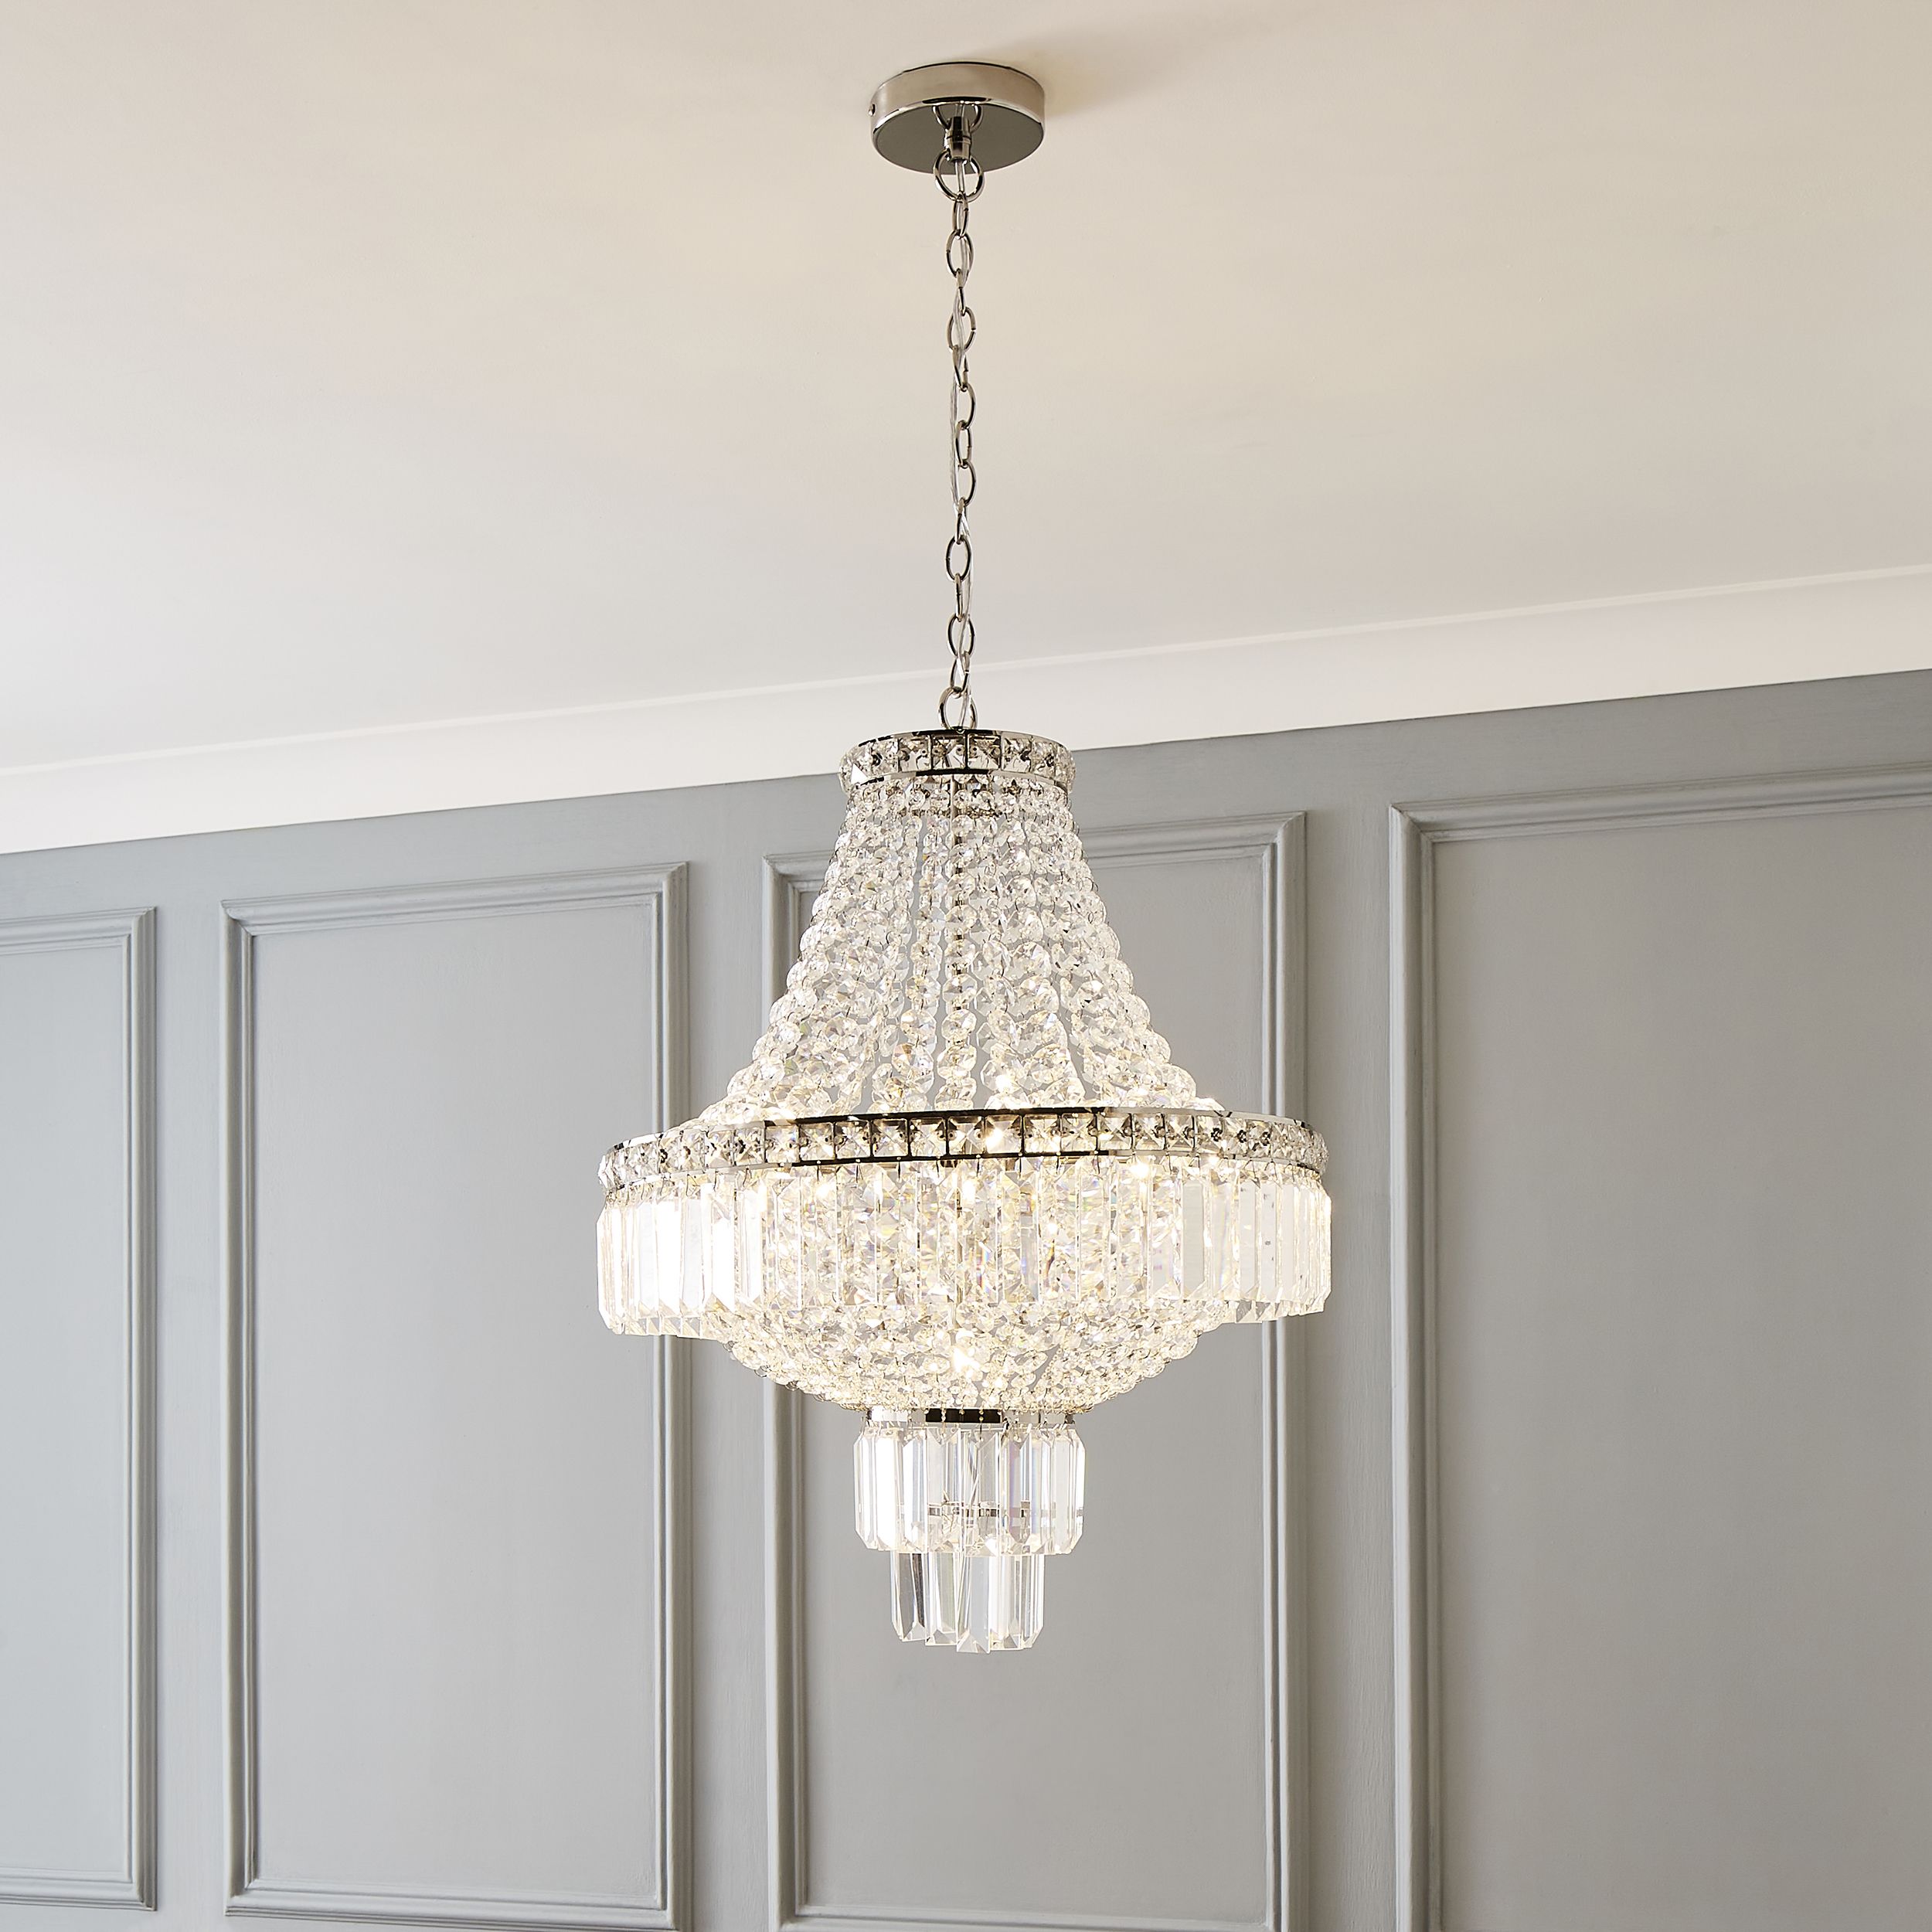 The Lighting Edit Tolo Gloss polished nickel effect 5 Lamp Pendant ceiling light, (Dia)500mm